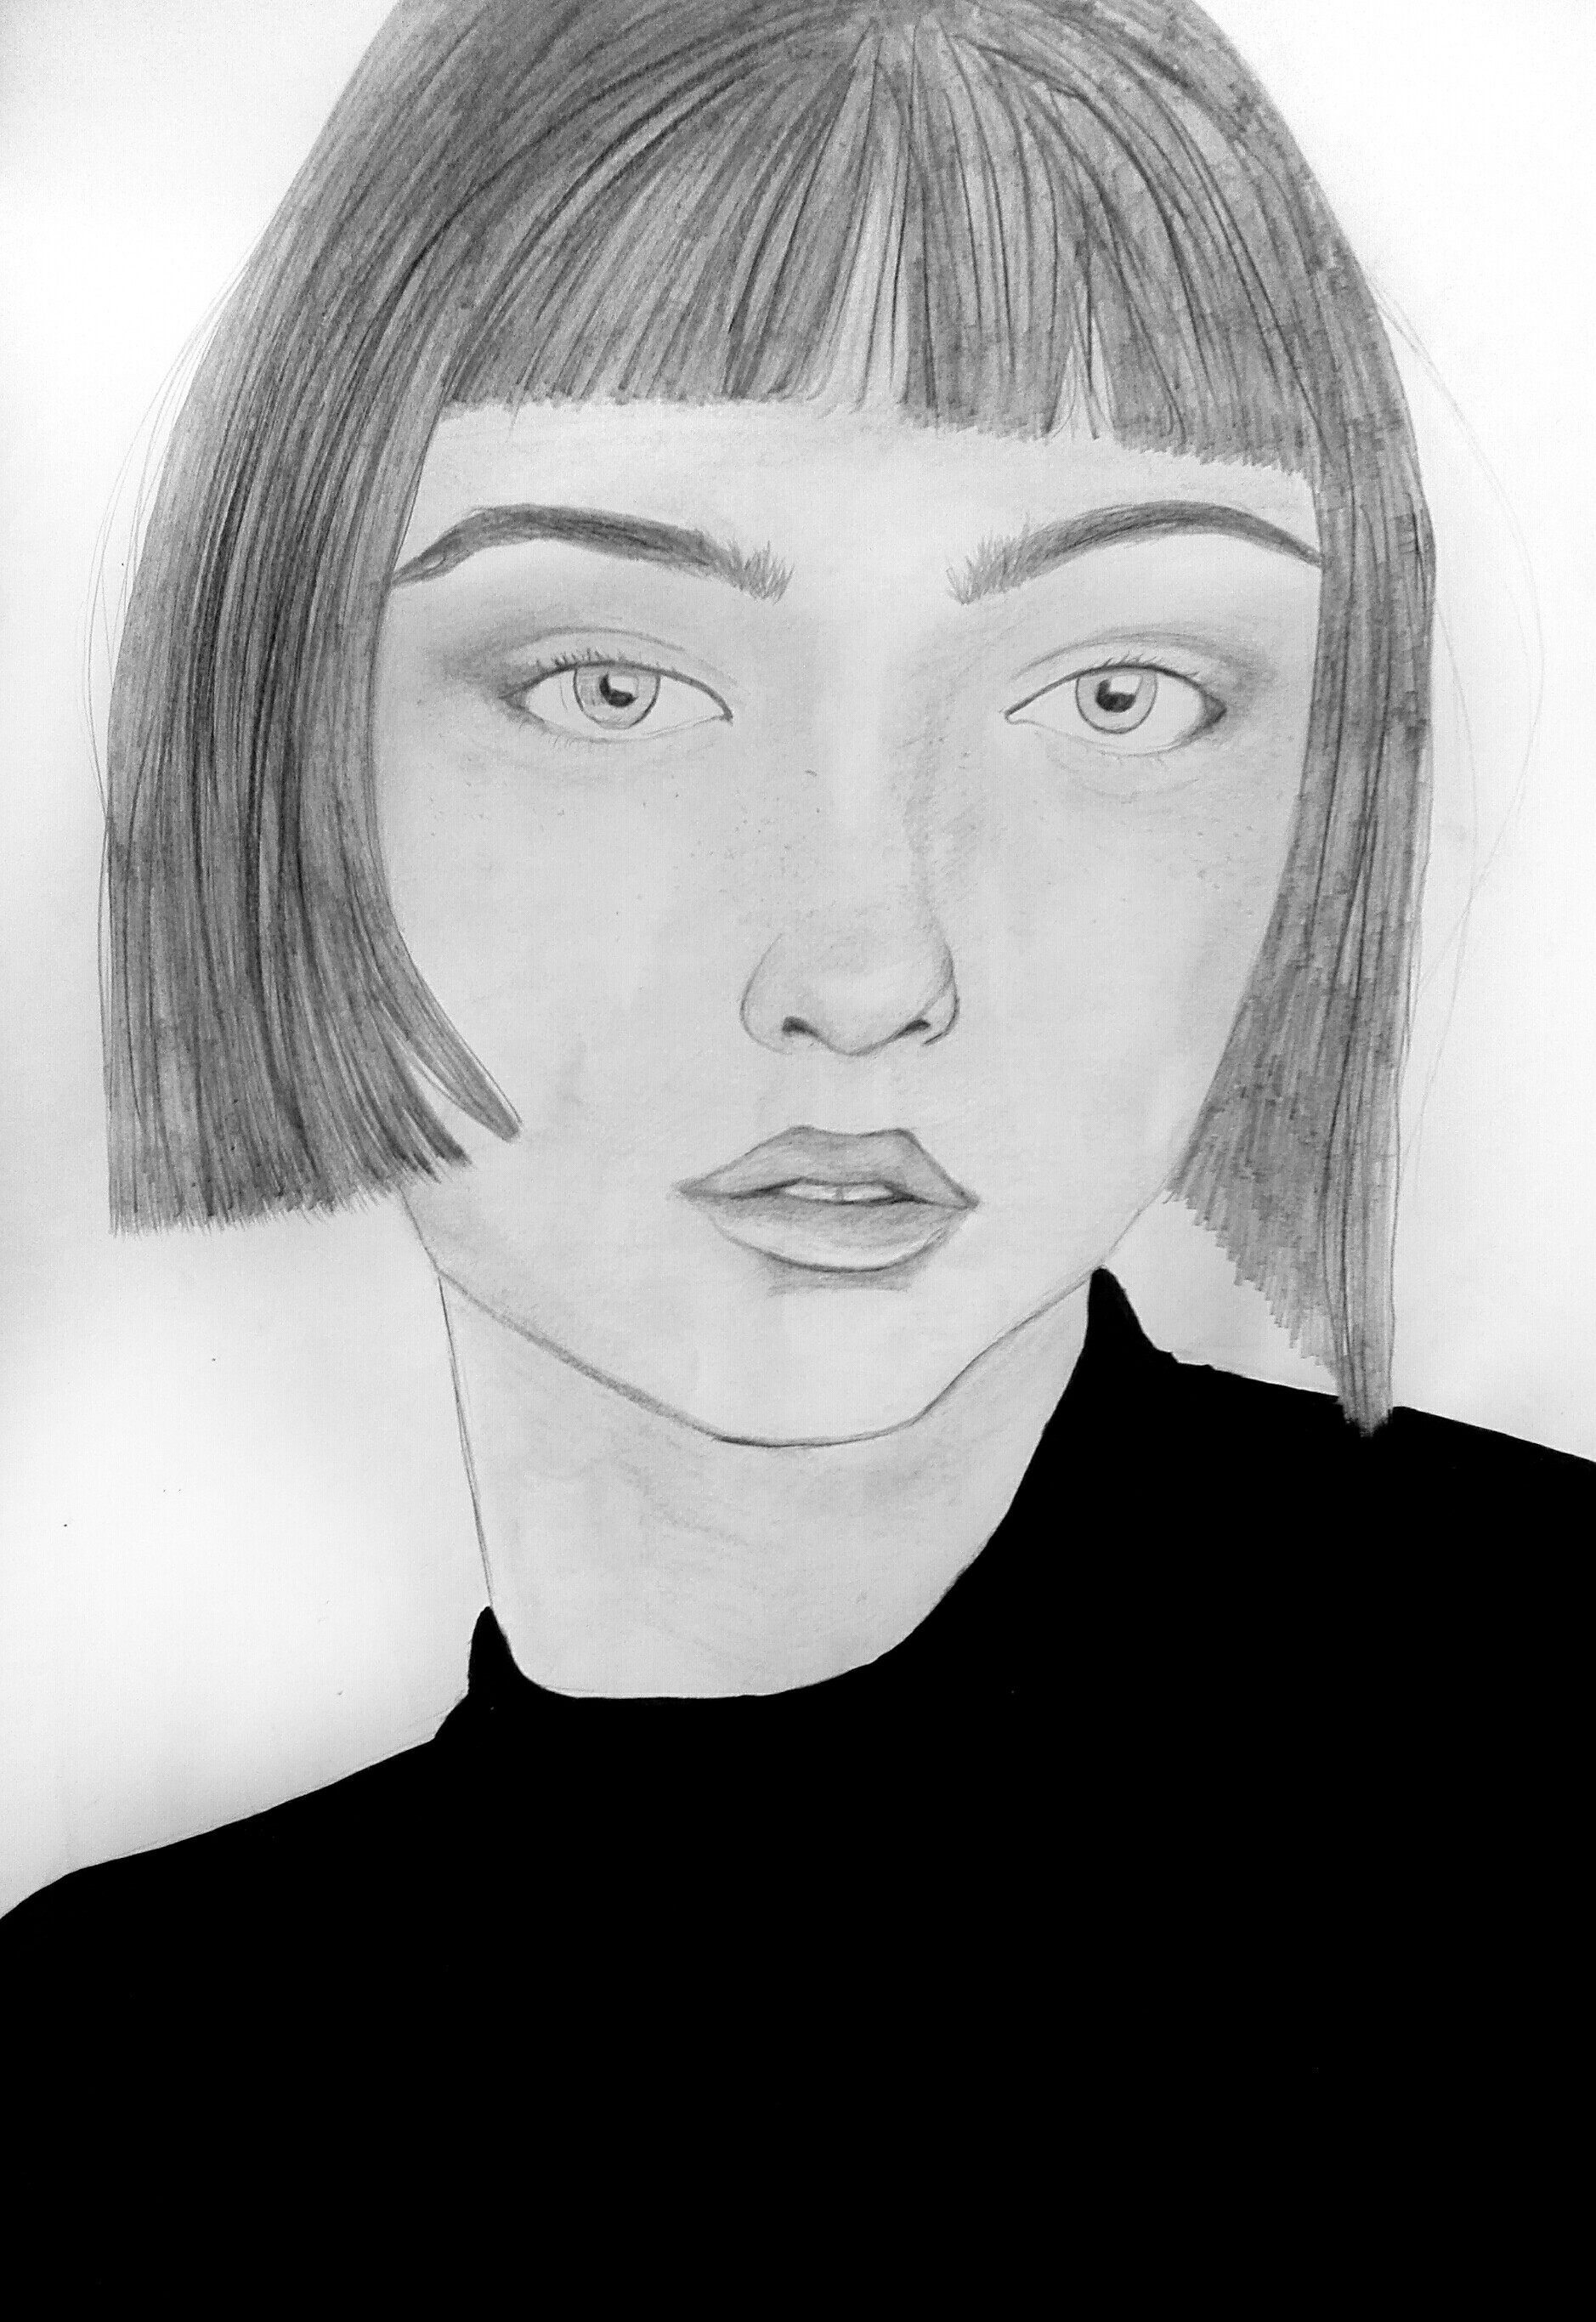 A really simple portrait sketch Im working on of a photo I found online  What do you guys think so far  rsketches